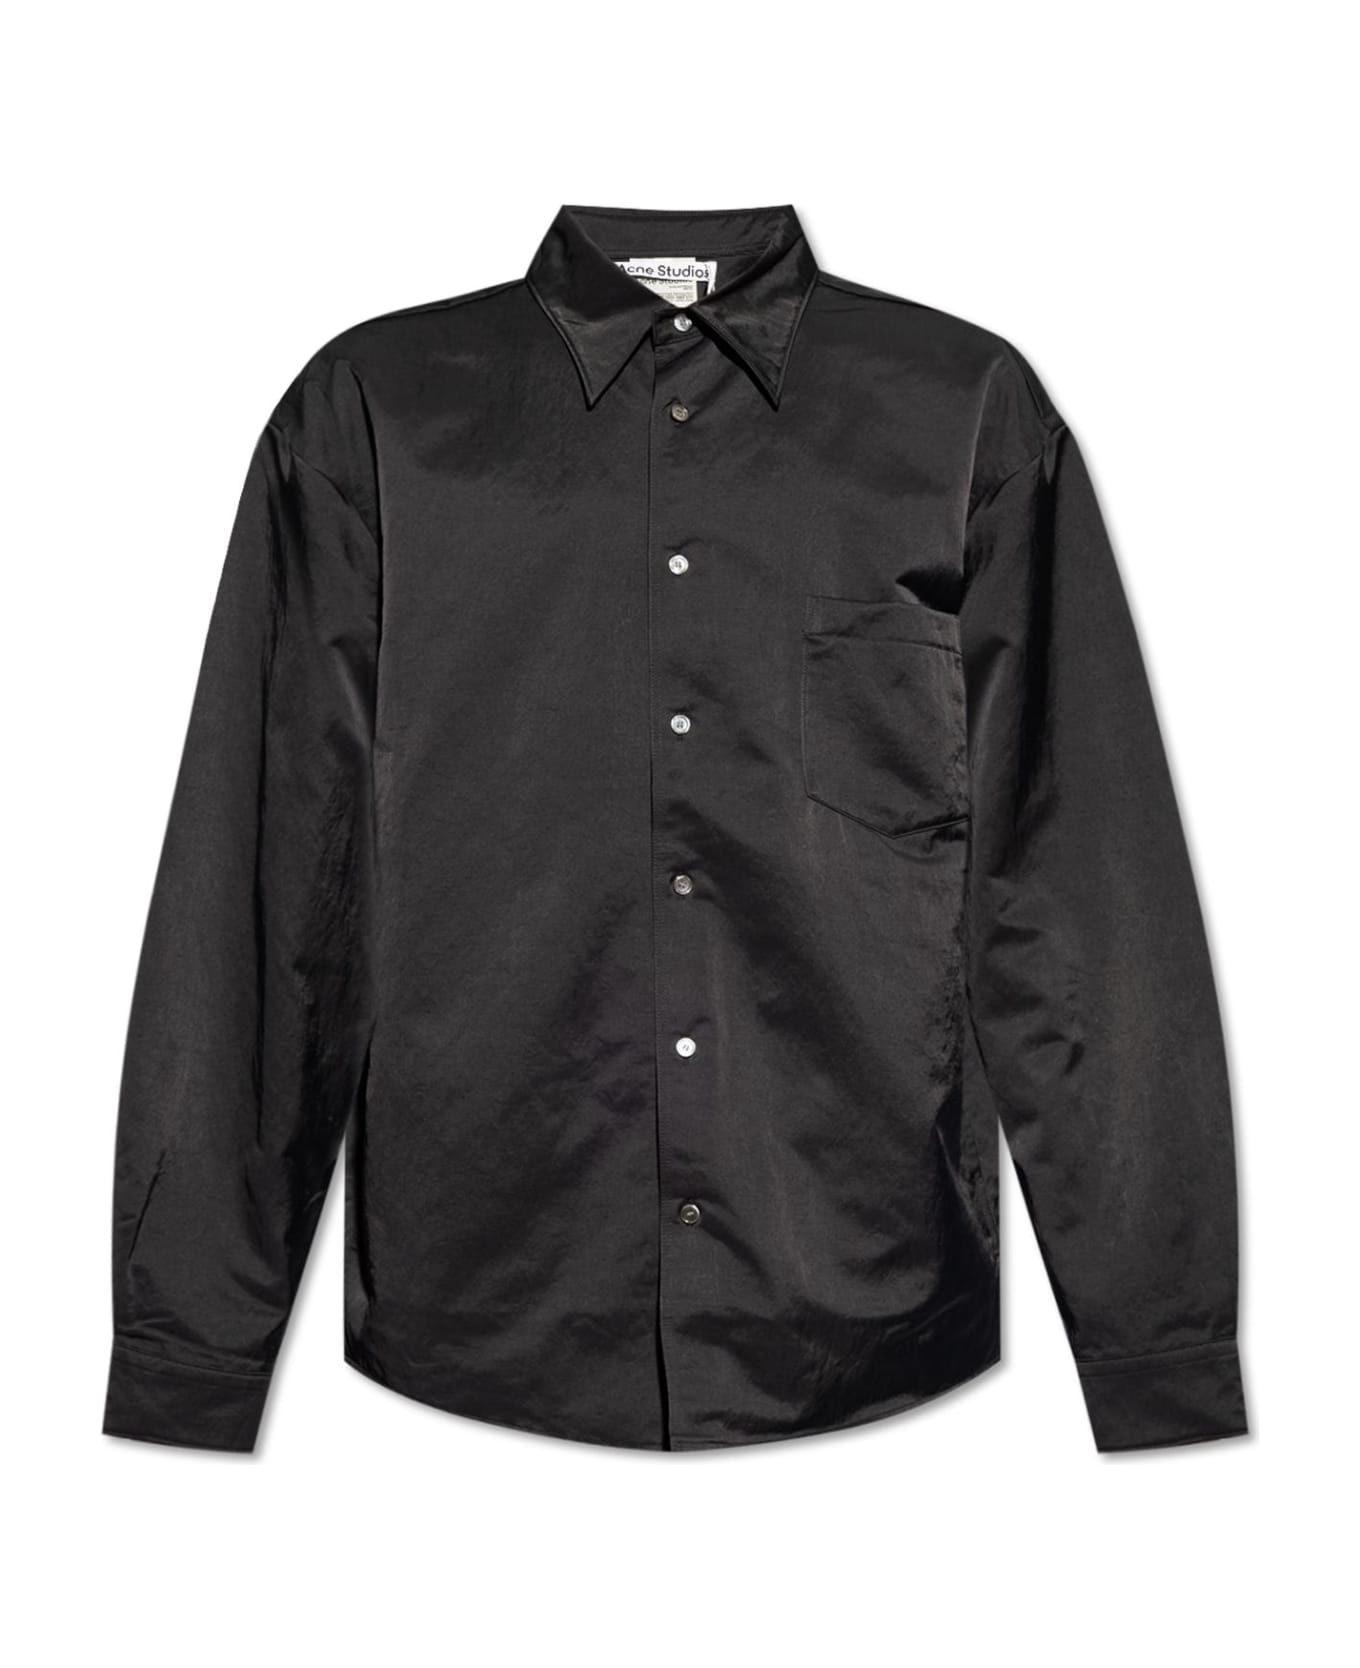 Acne Studios Relaxed-fitting Shirt - BLACK